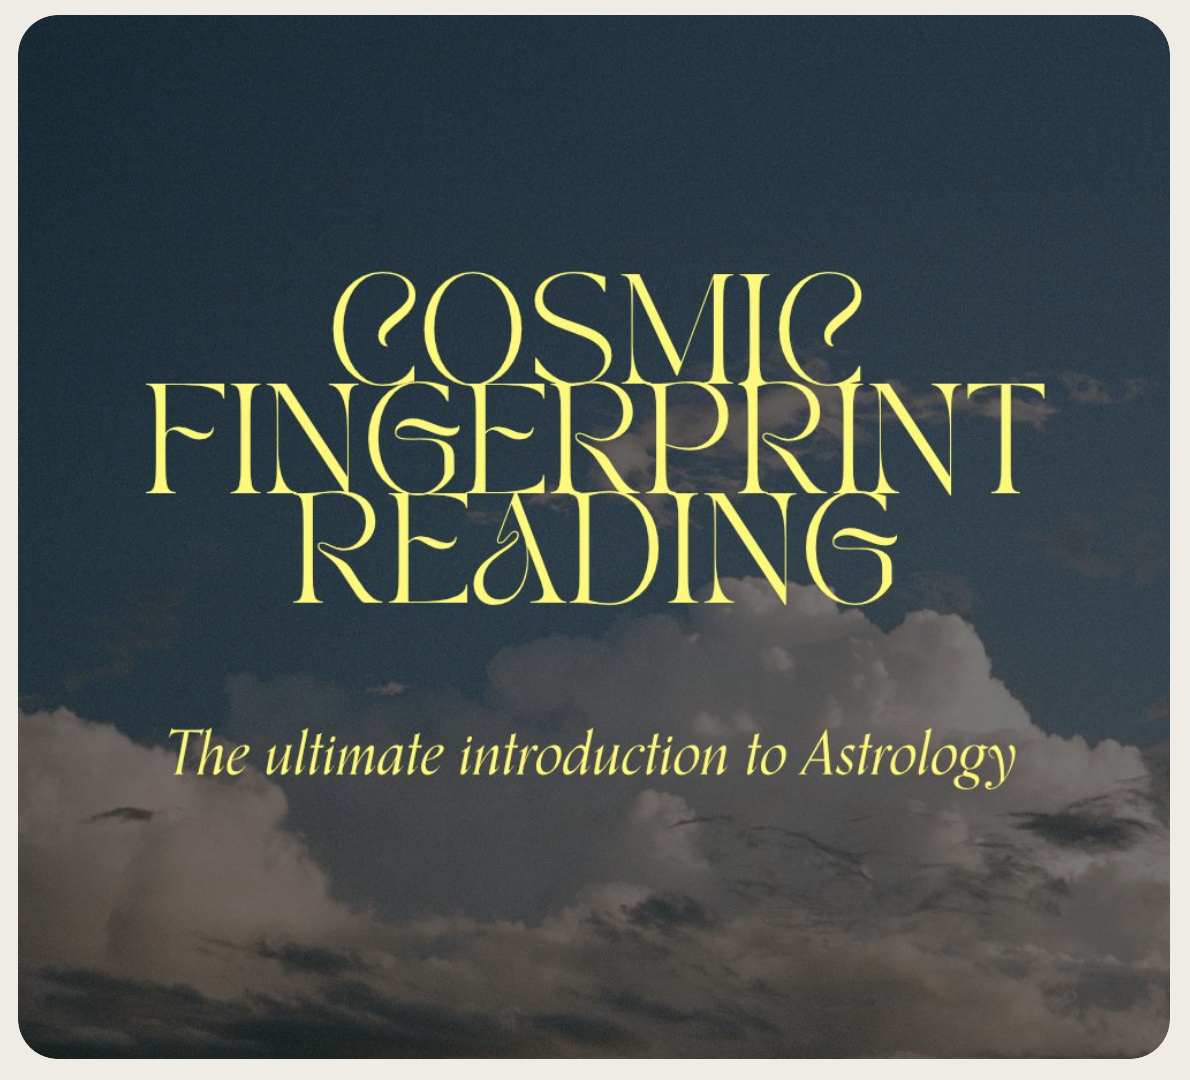 Image for Cosmic Reading from Lusid